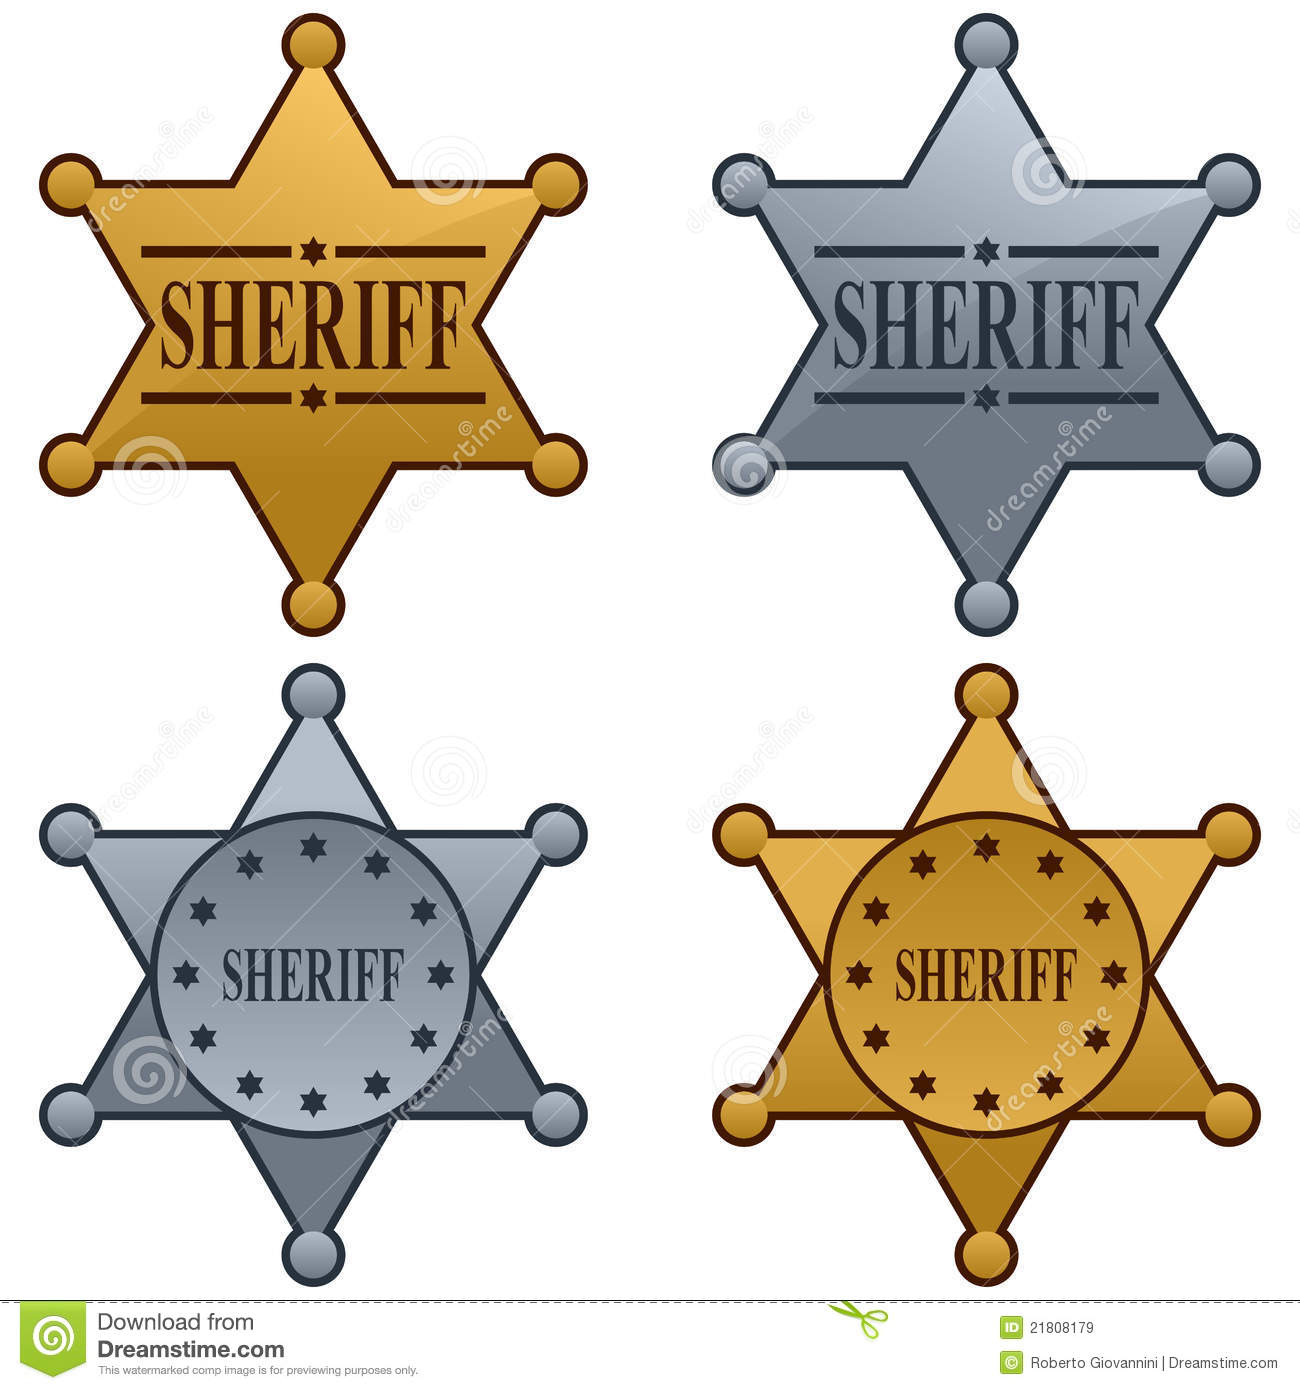 Sheriff Star Badge Set In Four Different Versions Isolated On White